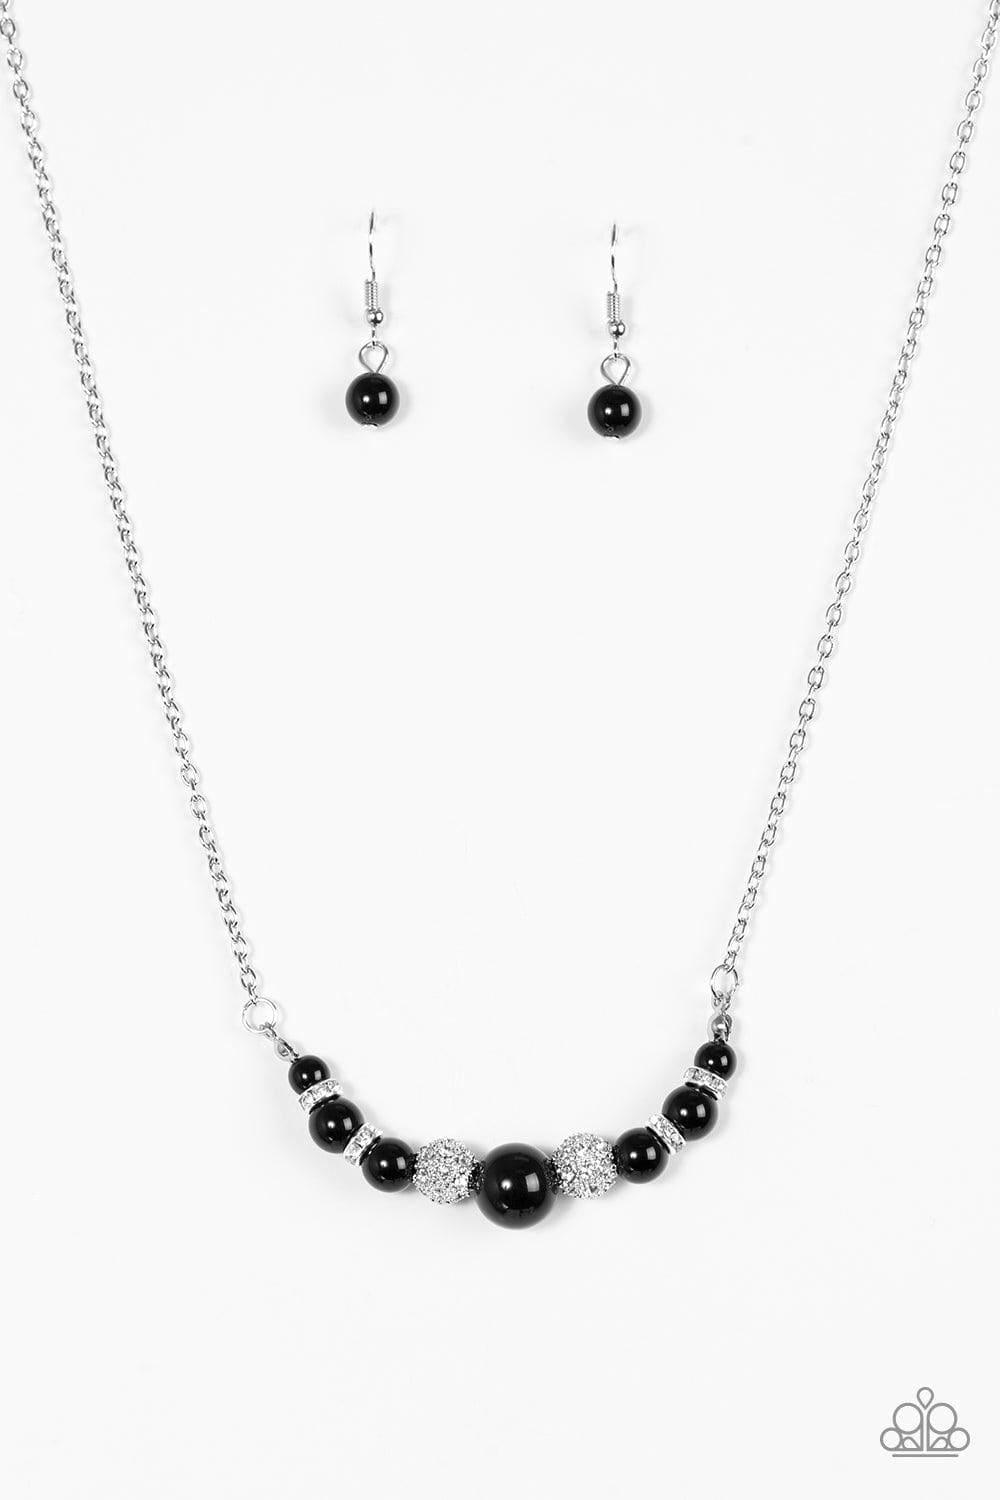 Paparazzi Accessories - Absolutely Brilliant - Black Necklace - Bling by JessieK